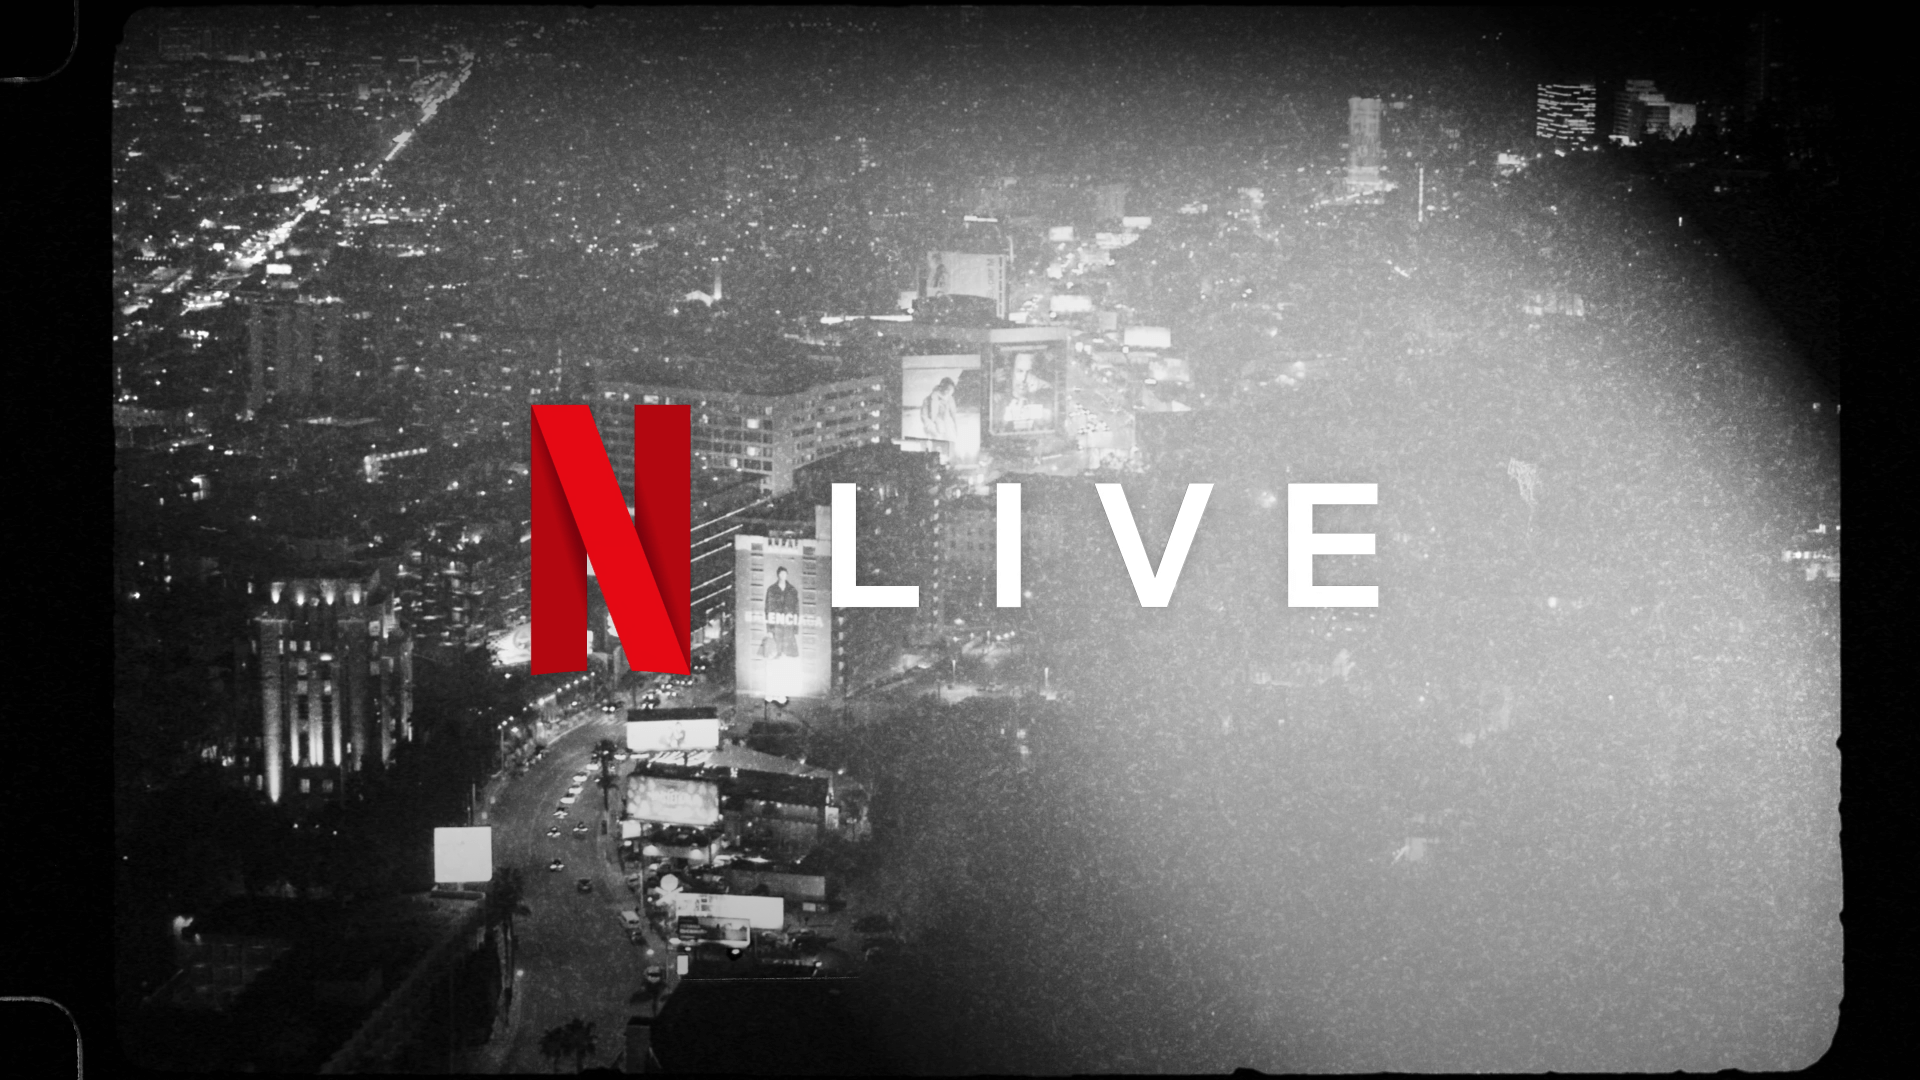 An aerial view of the sunset strip at night in black and white from the opening montage of Netflix's Chris Rock The Show Before The Show live special edited by Todd Bishop